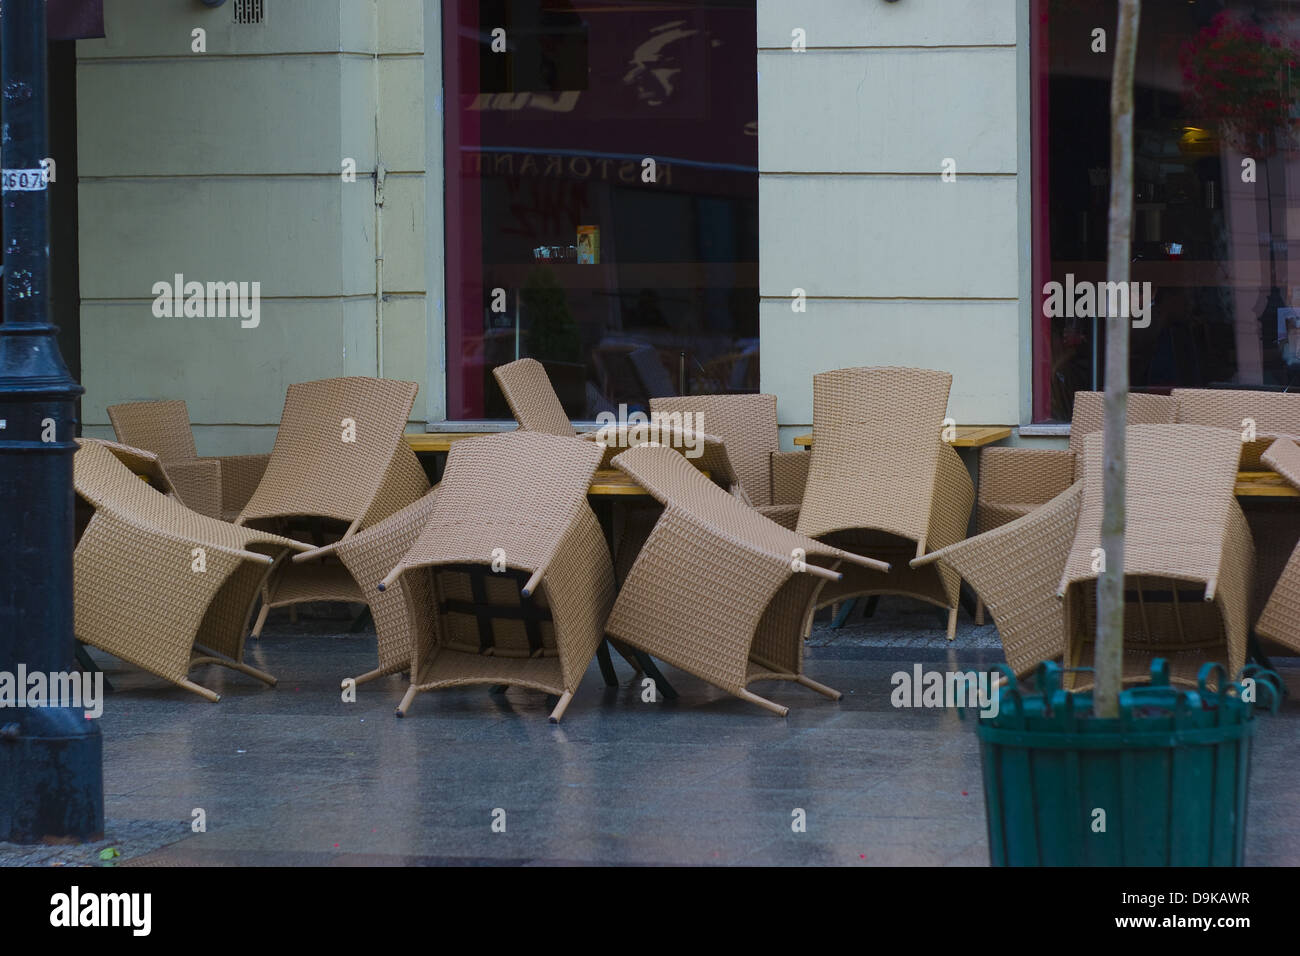 Chairs standing outside the restaurant in the rainy day Stock Photo